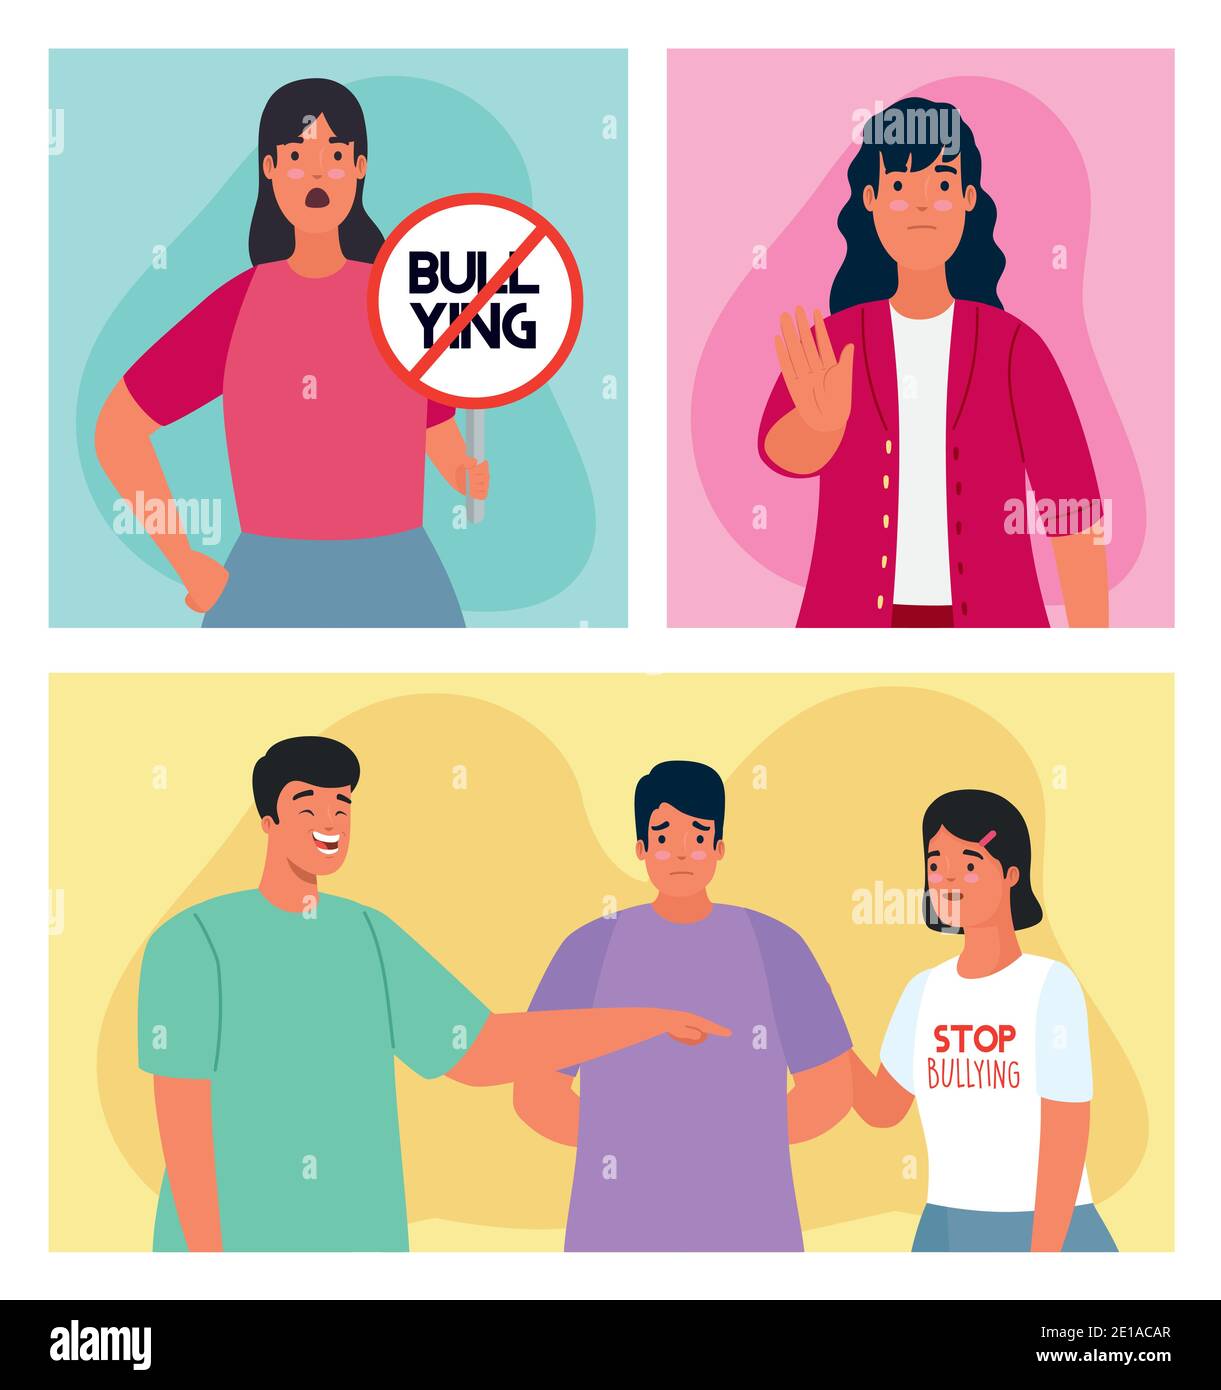 group of persons affected for bullying with stop signal characters Stock Vector